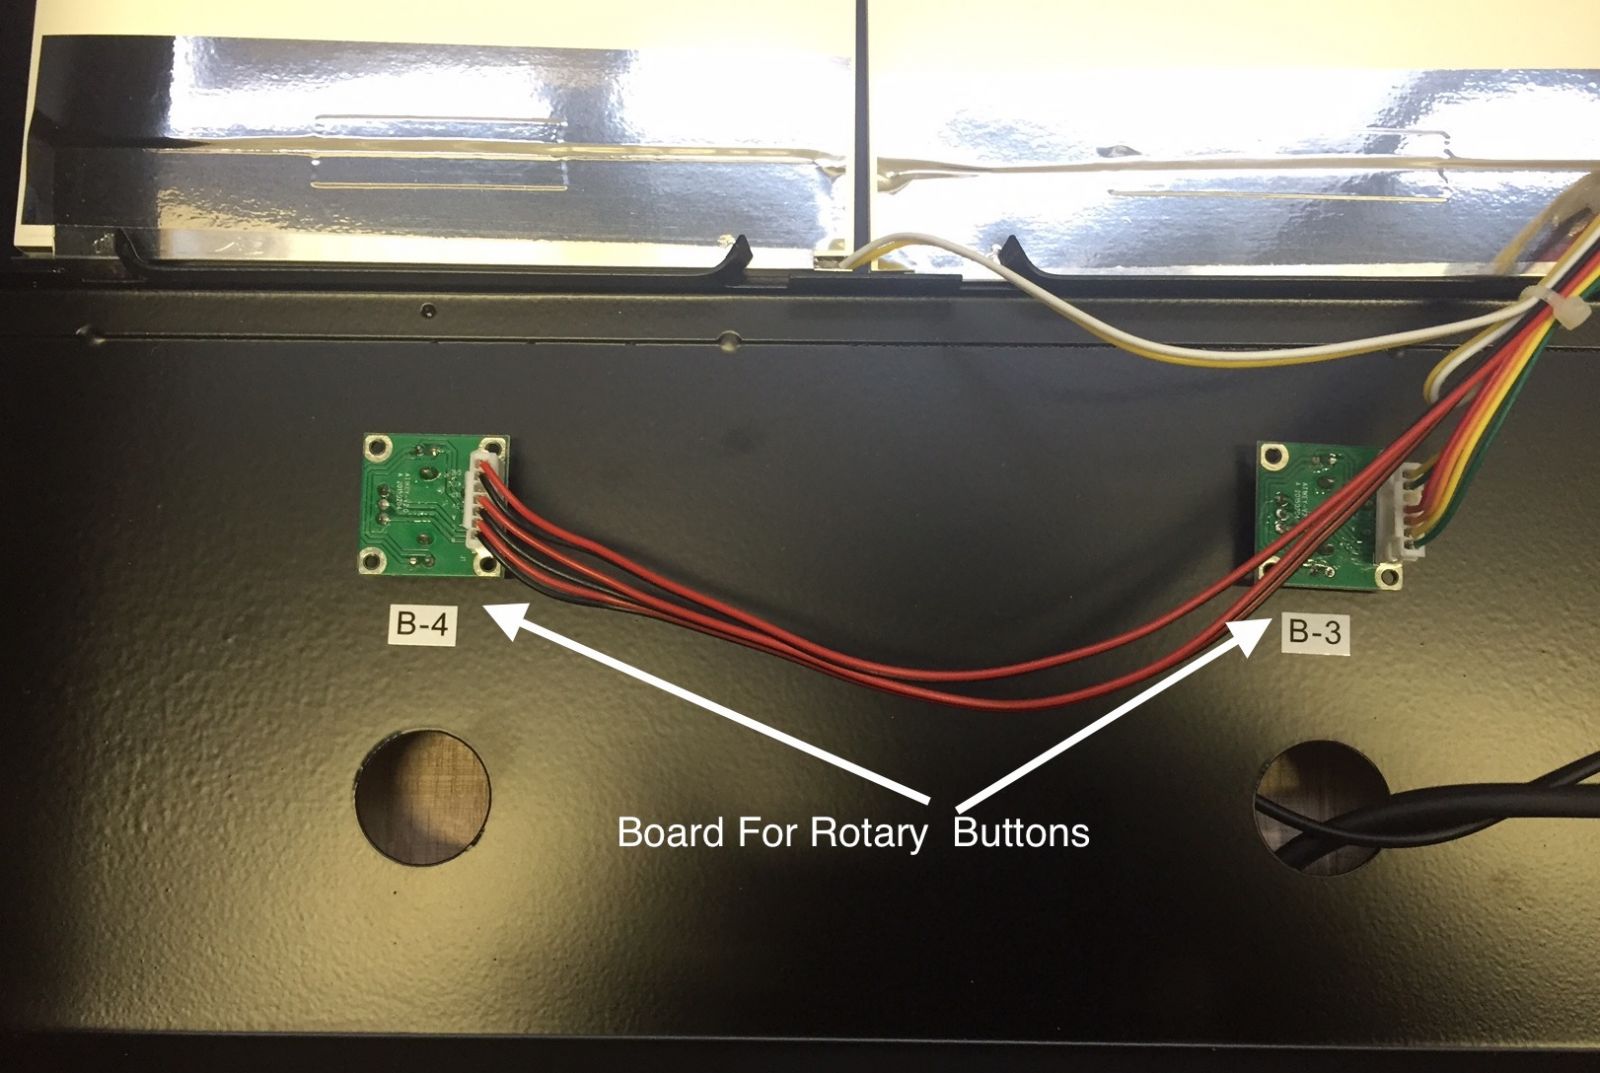 board-for-rotary-buttons-on-audio-demonstration-bench